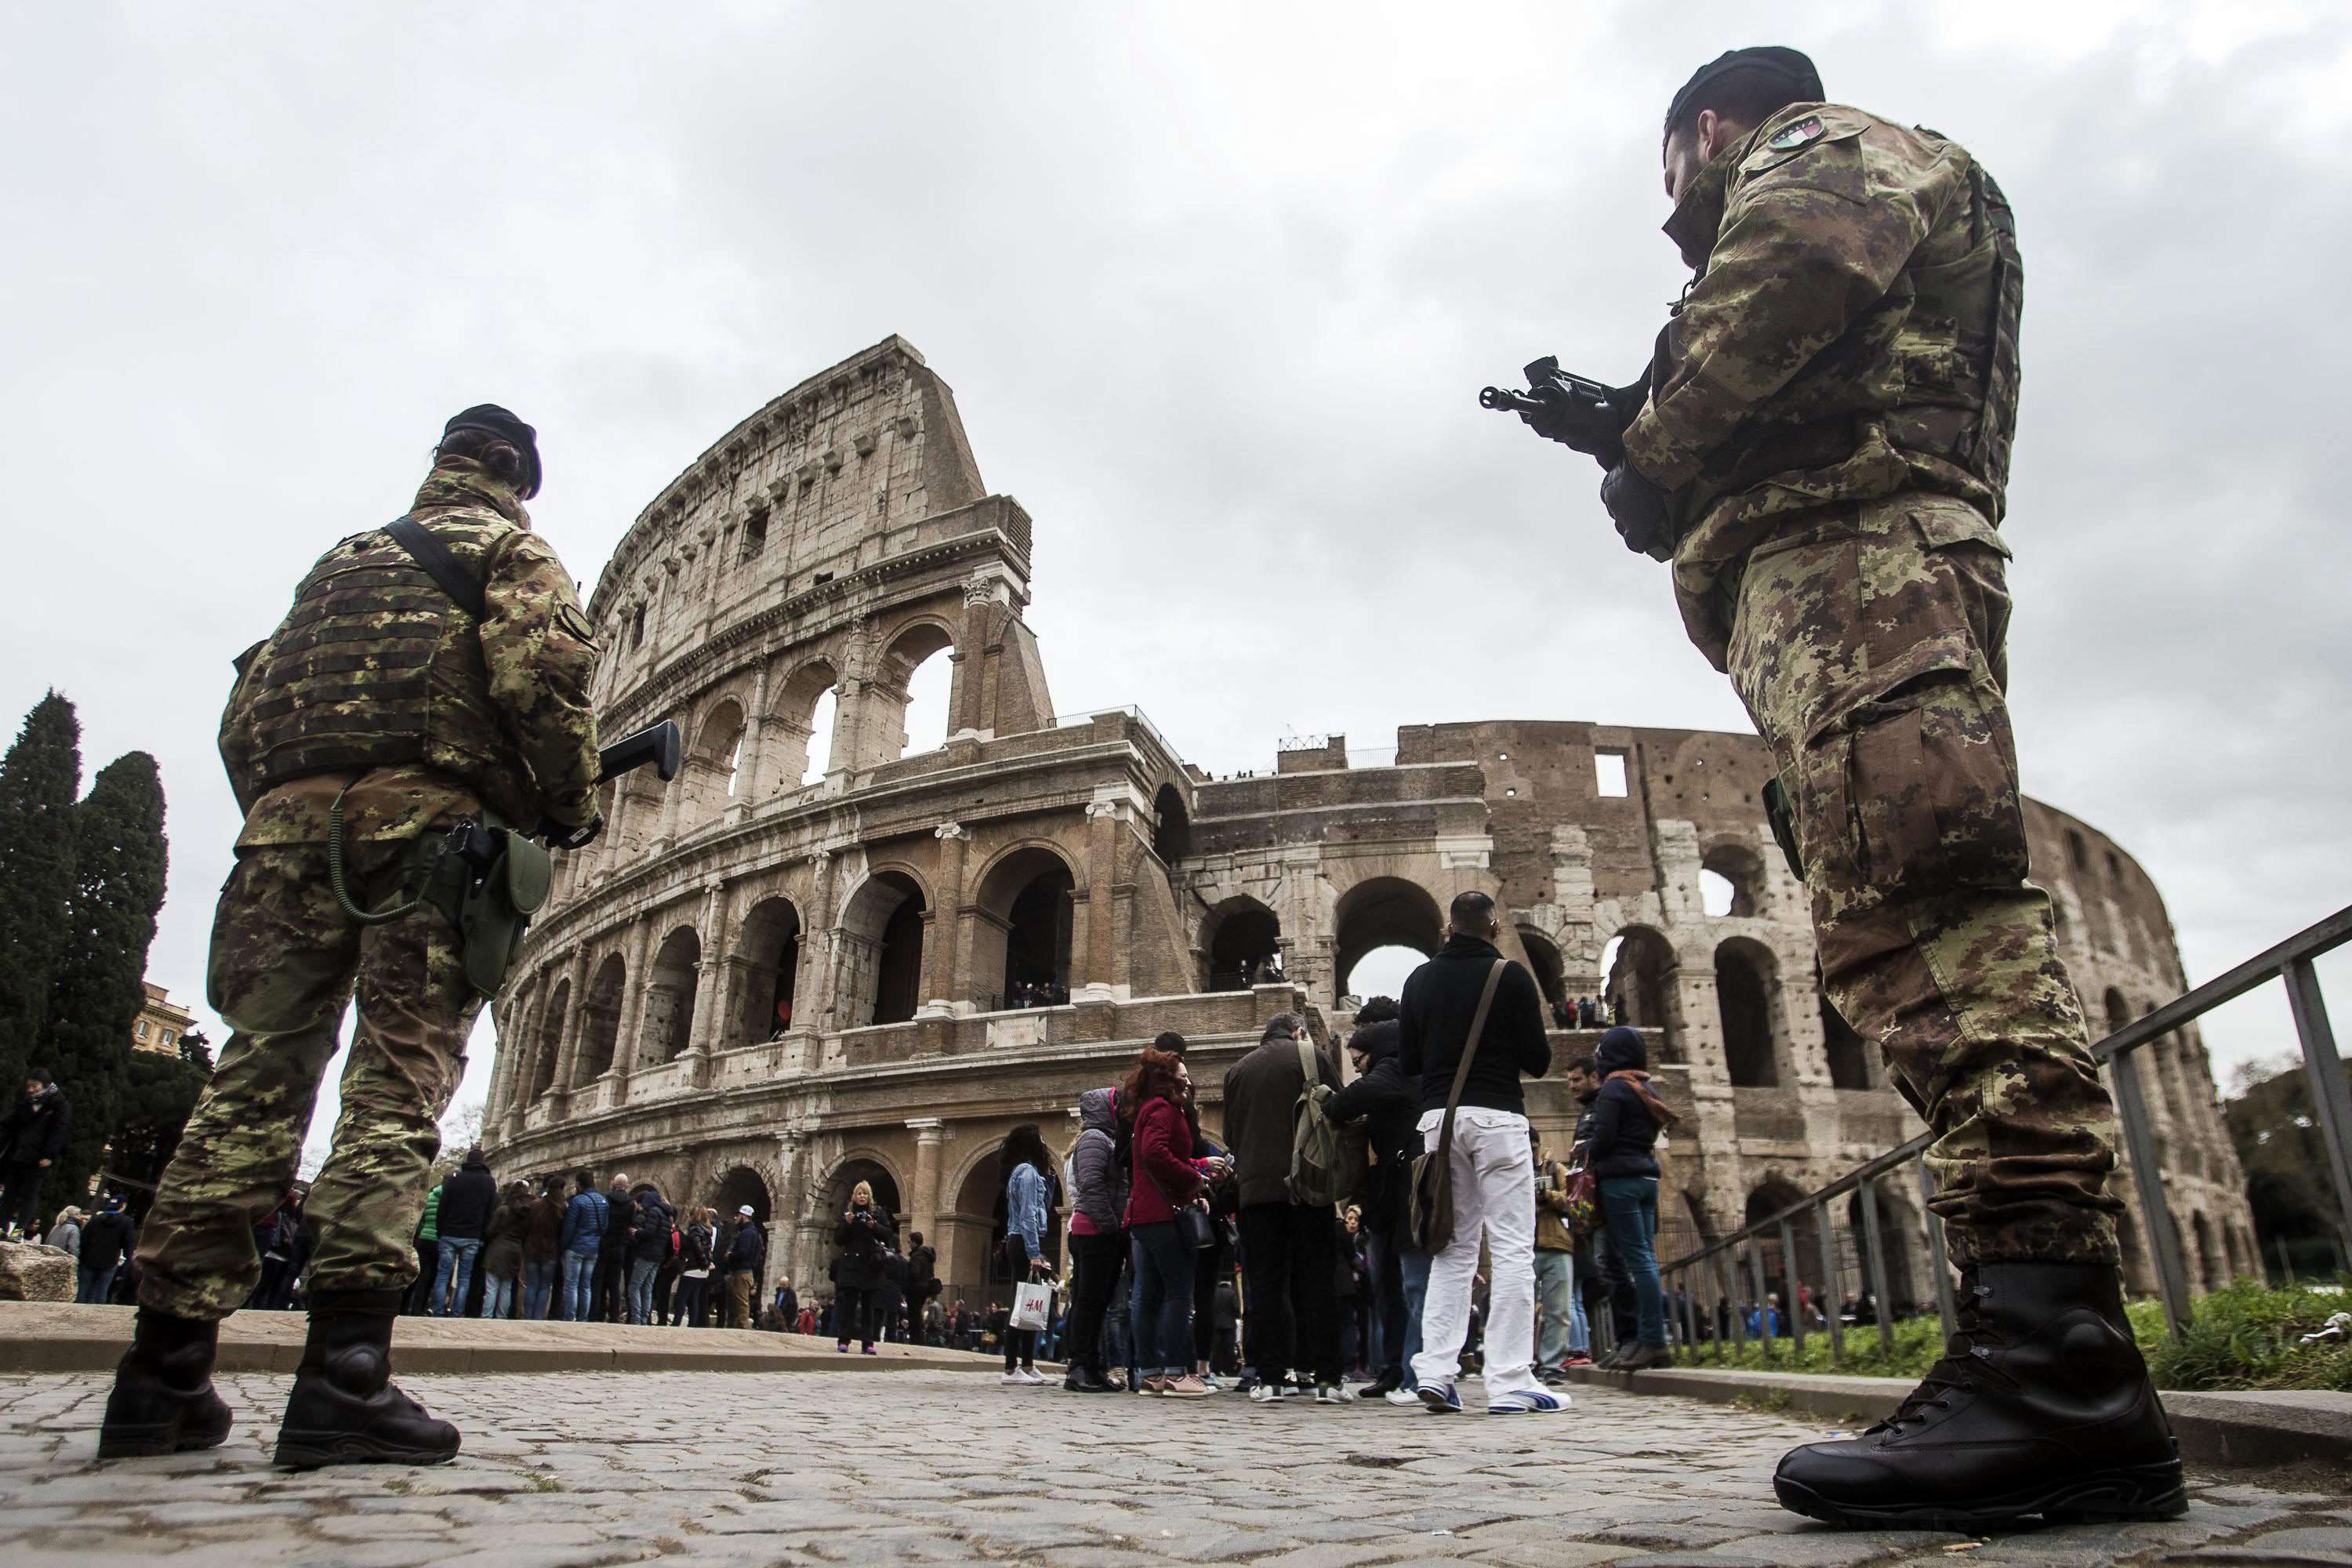 Soldiers guard the Colosseum in Rome on Wednesday amid heightened tension in the wake of the Brussels terrorist attacks. Photo: EPA